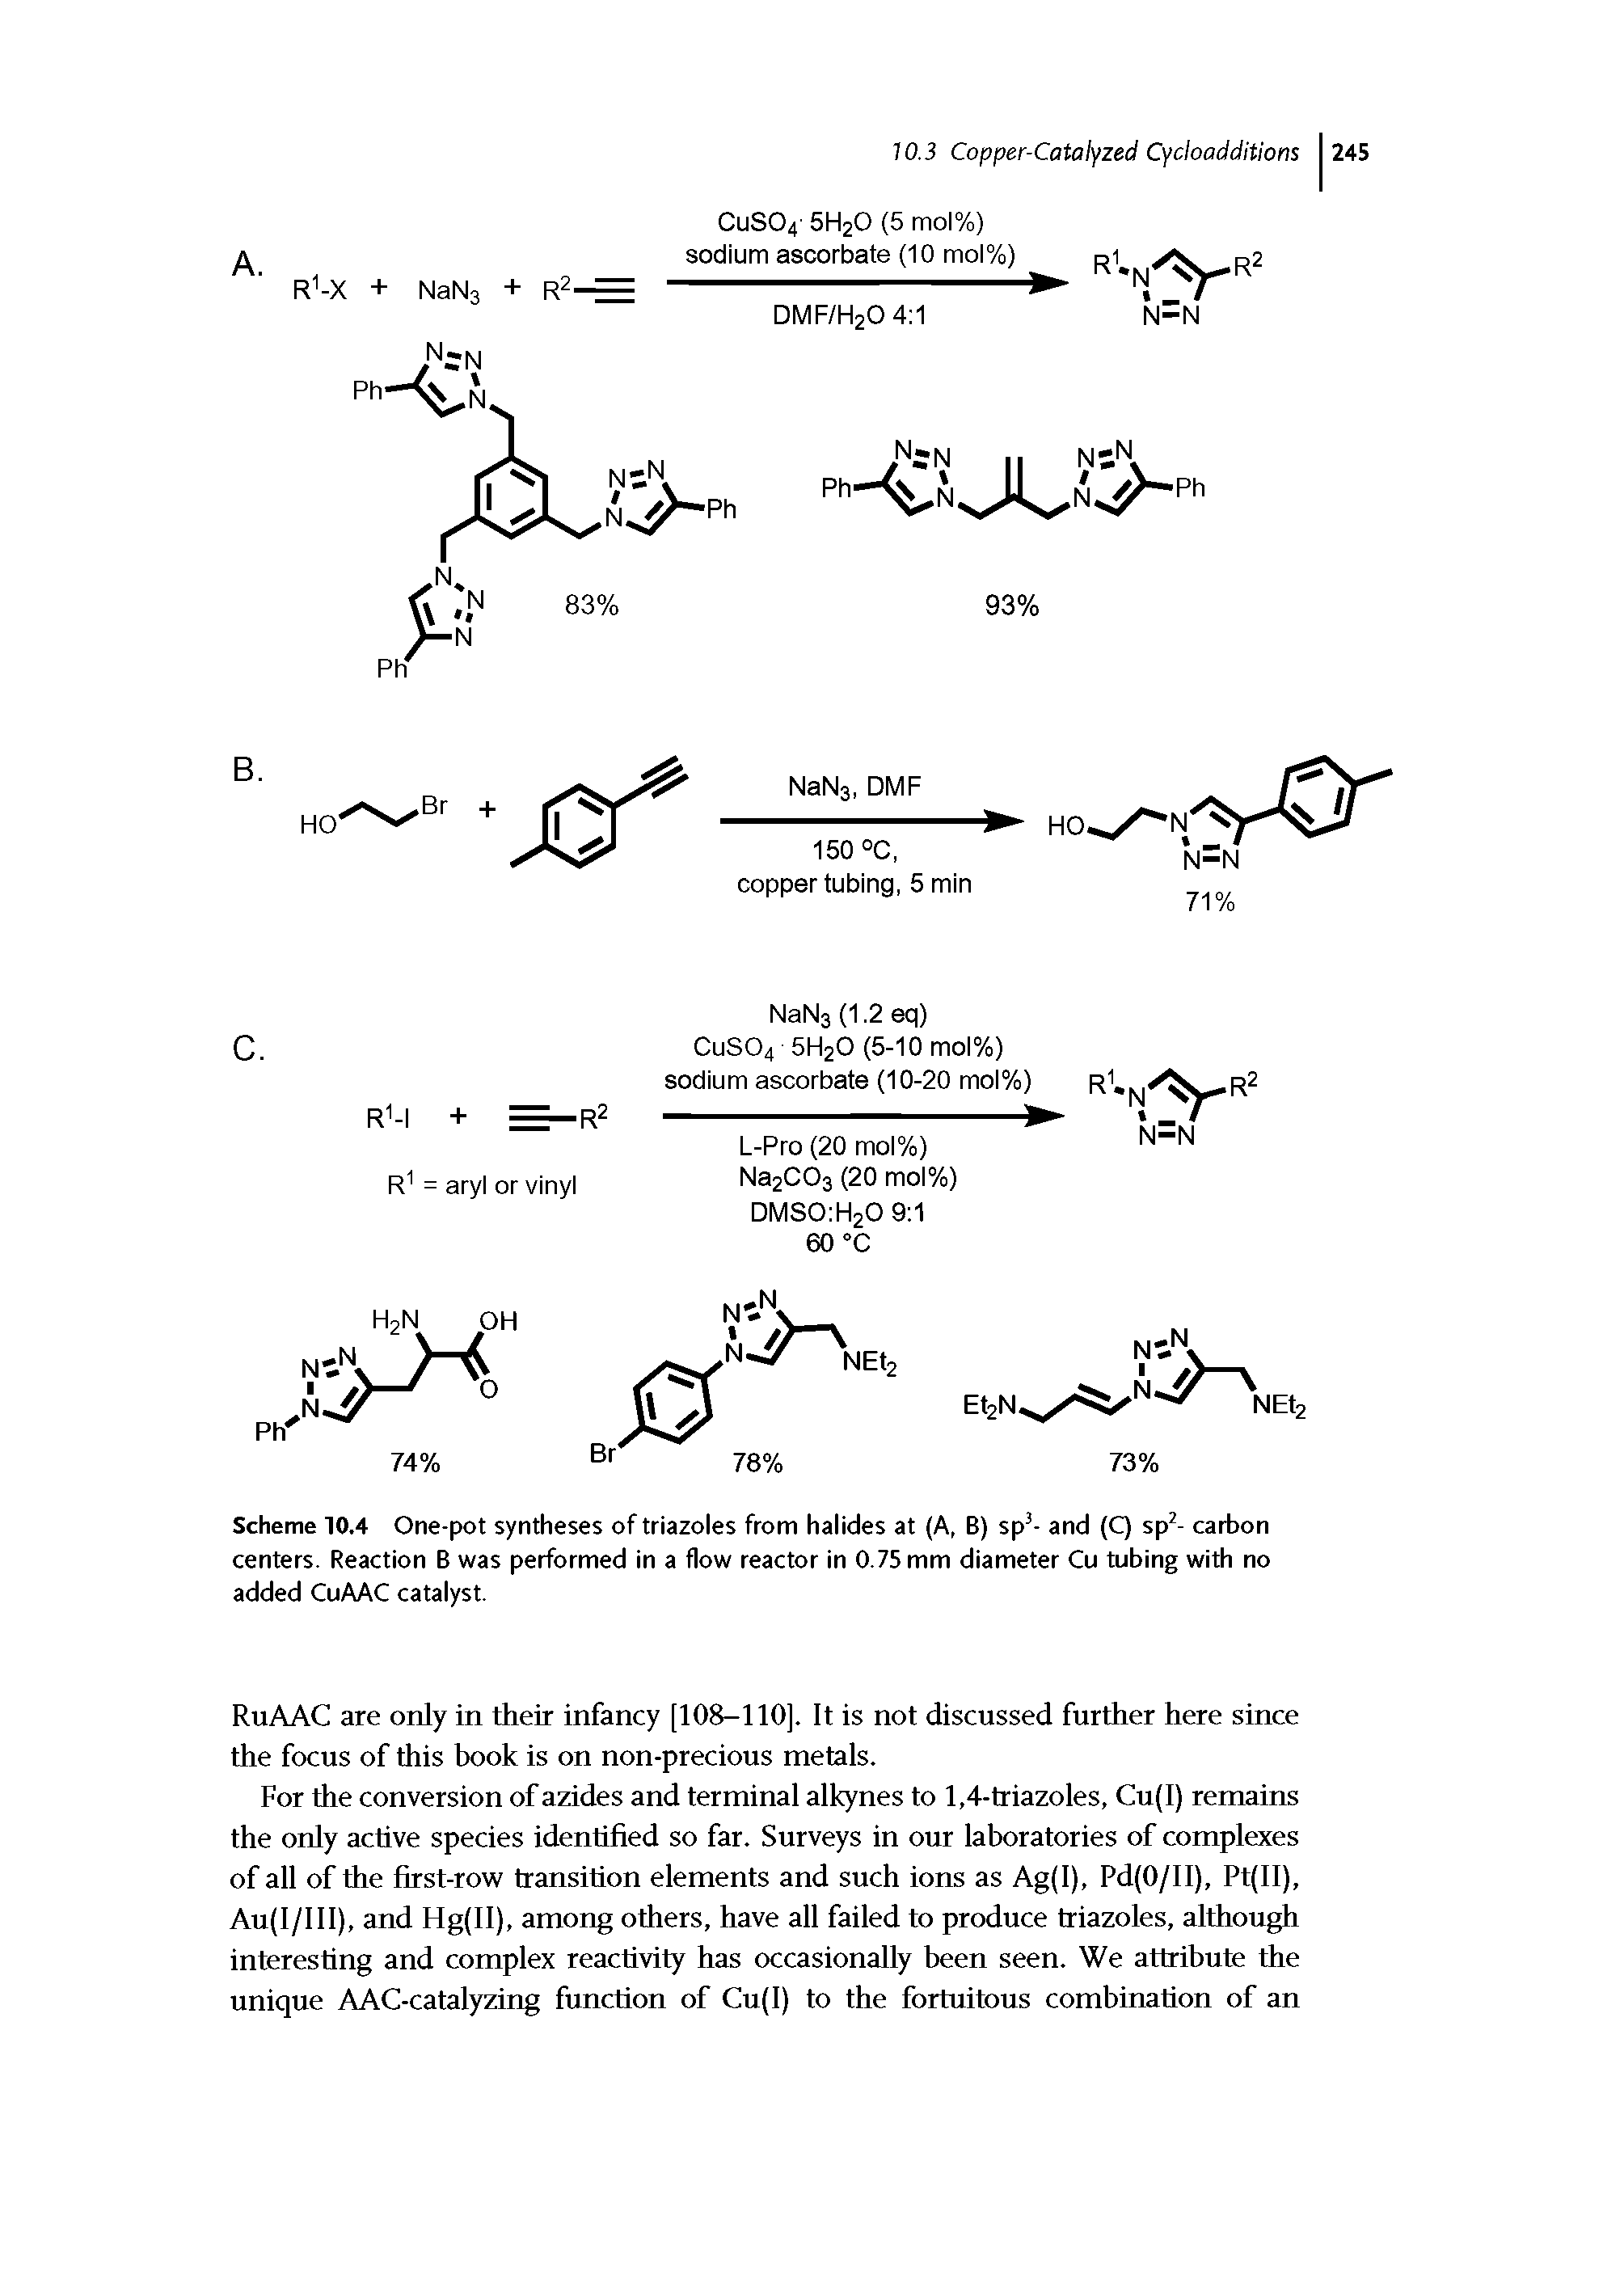 Scheme 10.4 One-pot syntheses of triazoles from halides at (A, B) sp - and (q sp - carbon centers. Reaction B was performed in a flow reactor in 0.75 mm diameter Cu tubing with no added CuAAC catalyst.